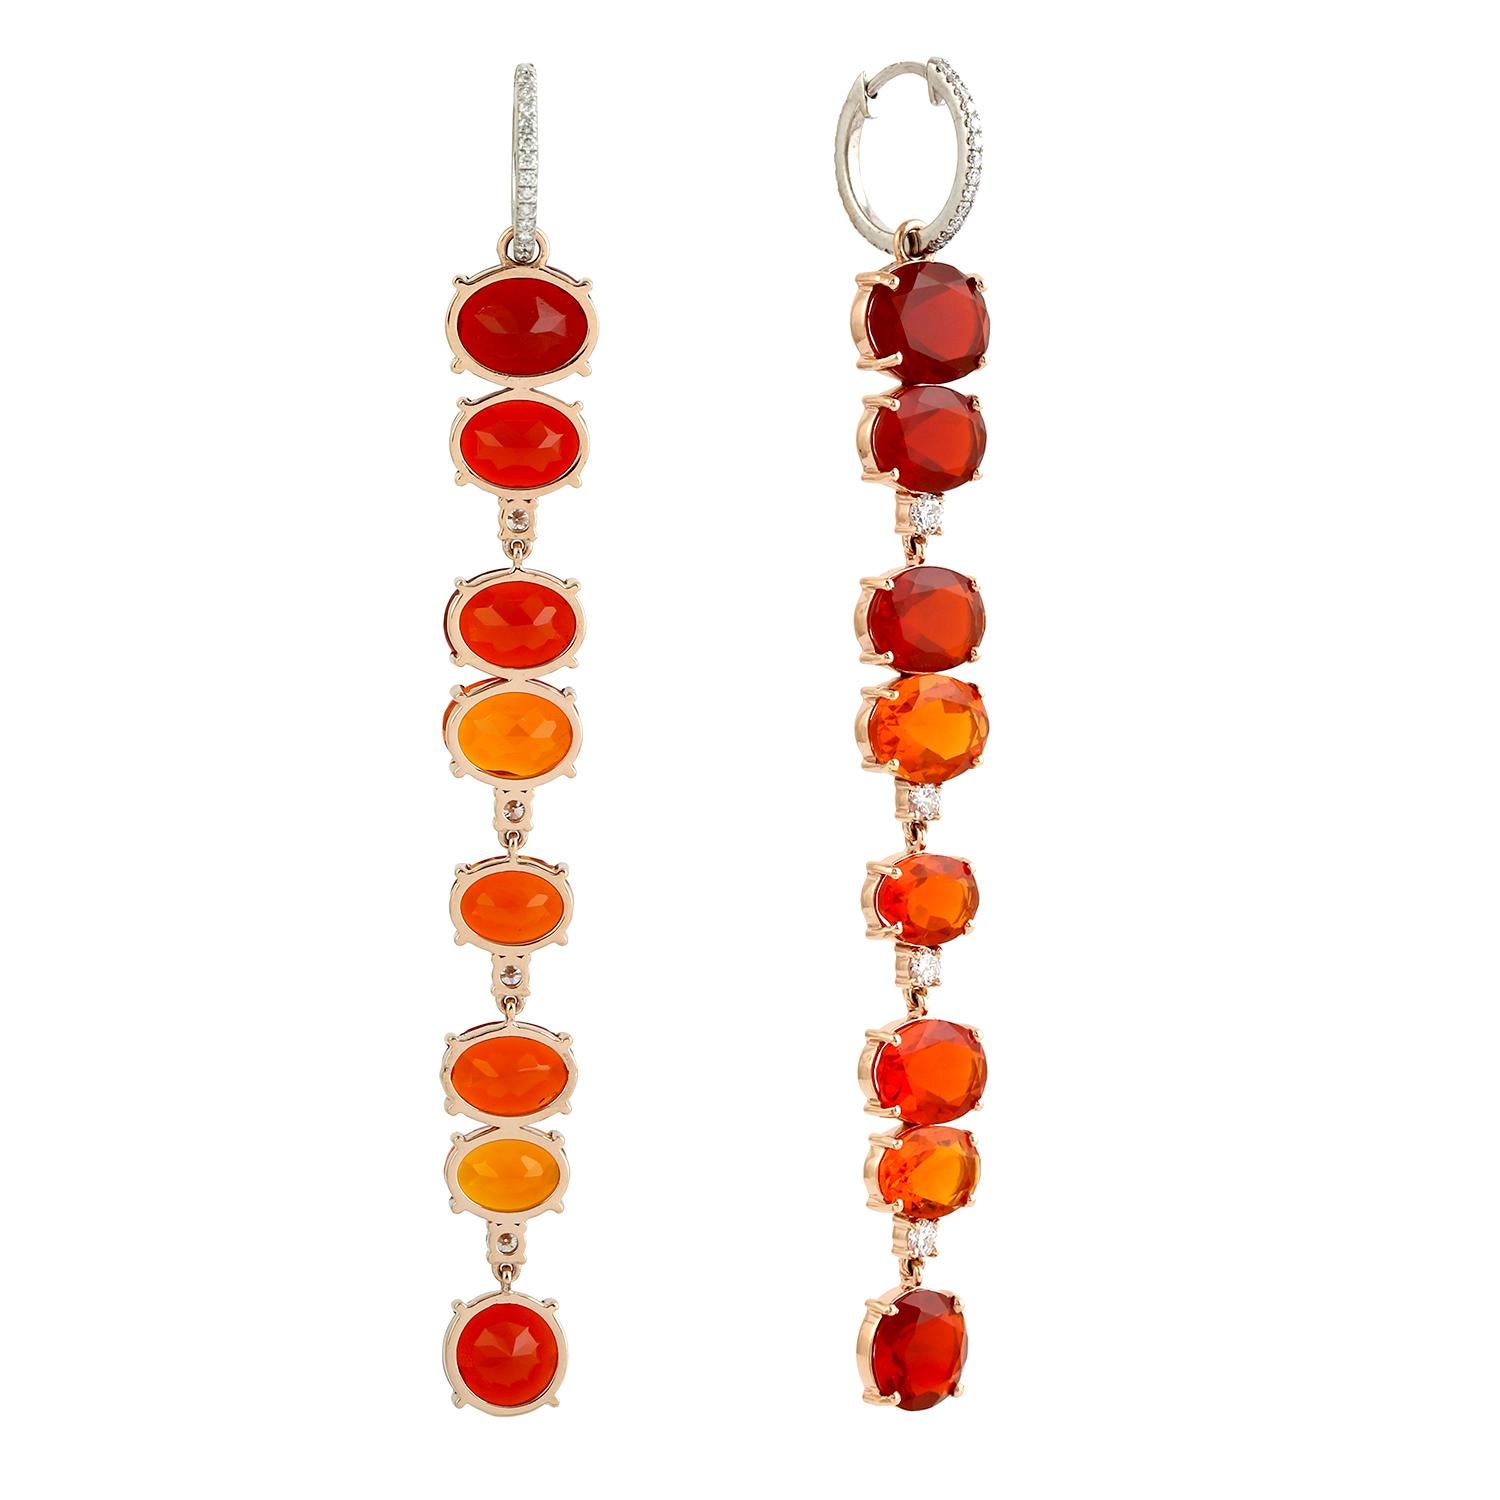 Contemporary 19.04 ct Fire Opal Dangle Earrings With Diamonds Made In 18K Rose Gold For Sale